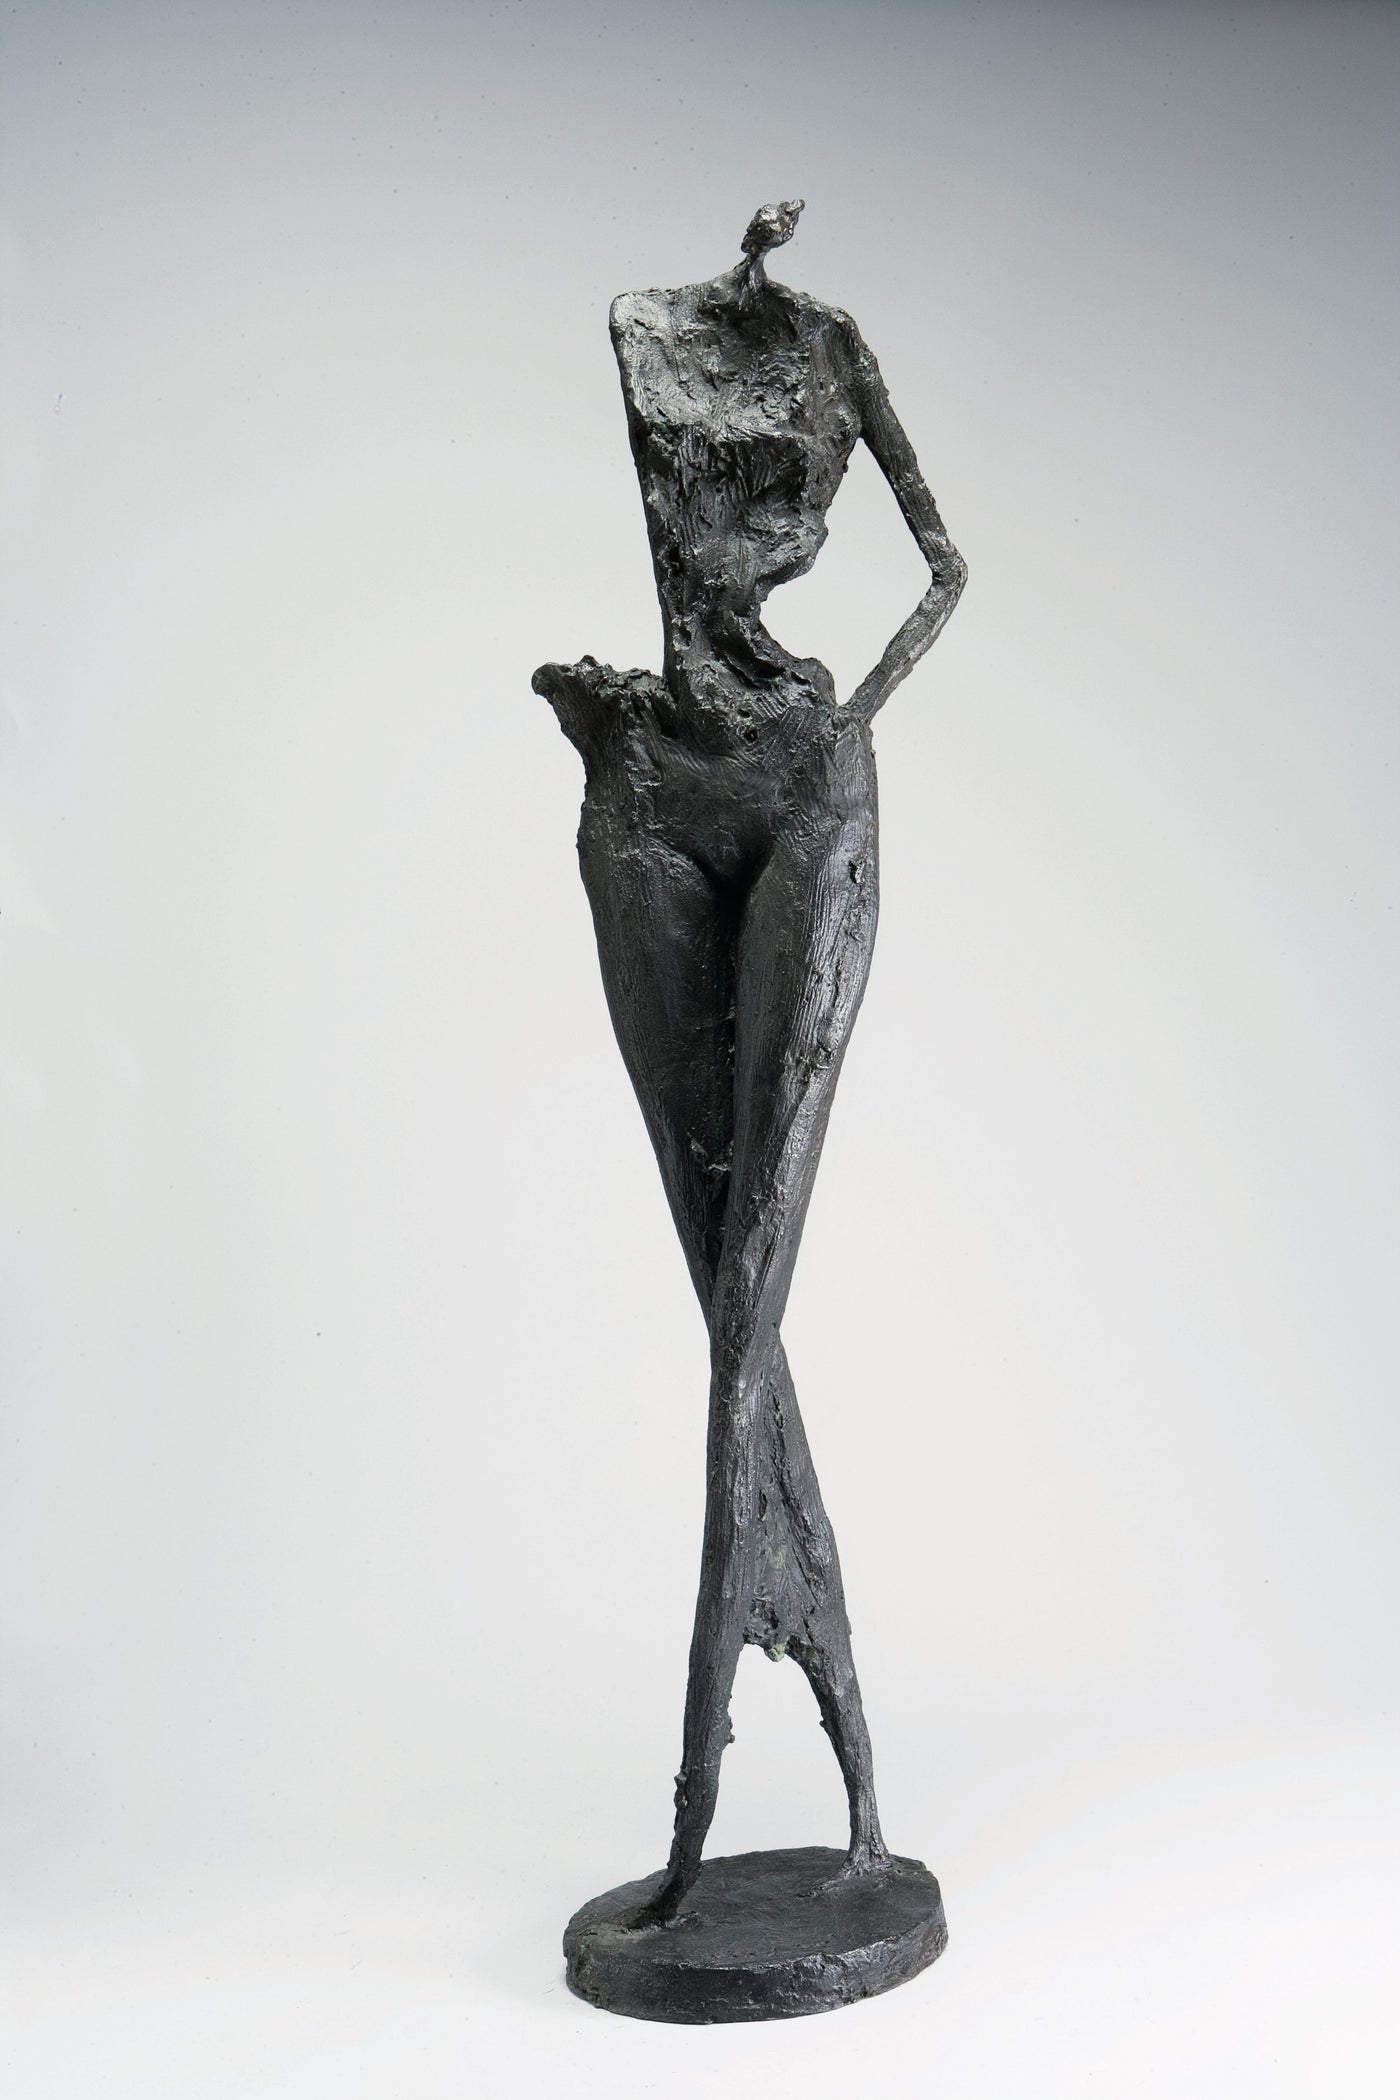 A Young Girl - Future Sculptures - Won Lee